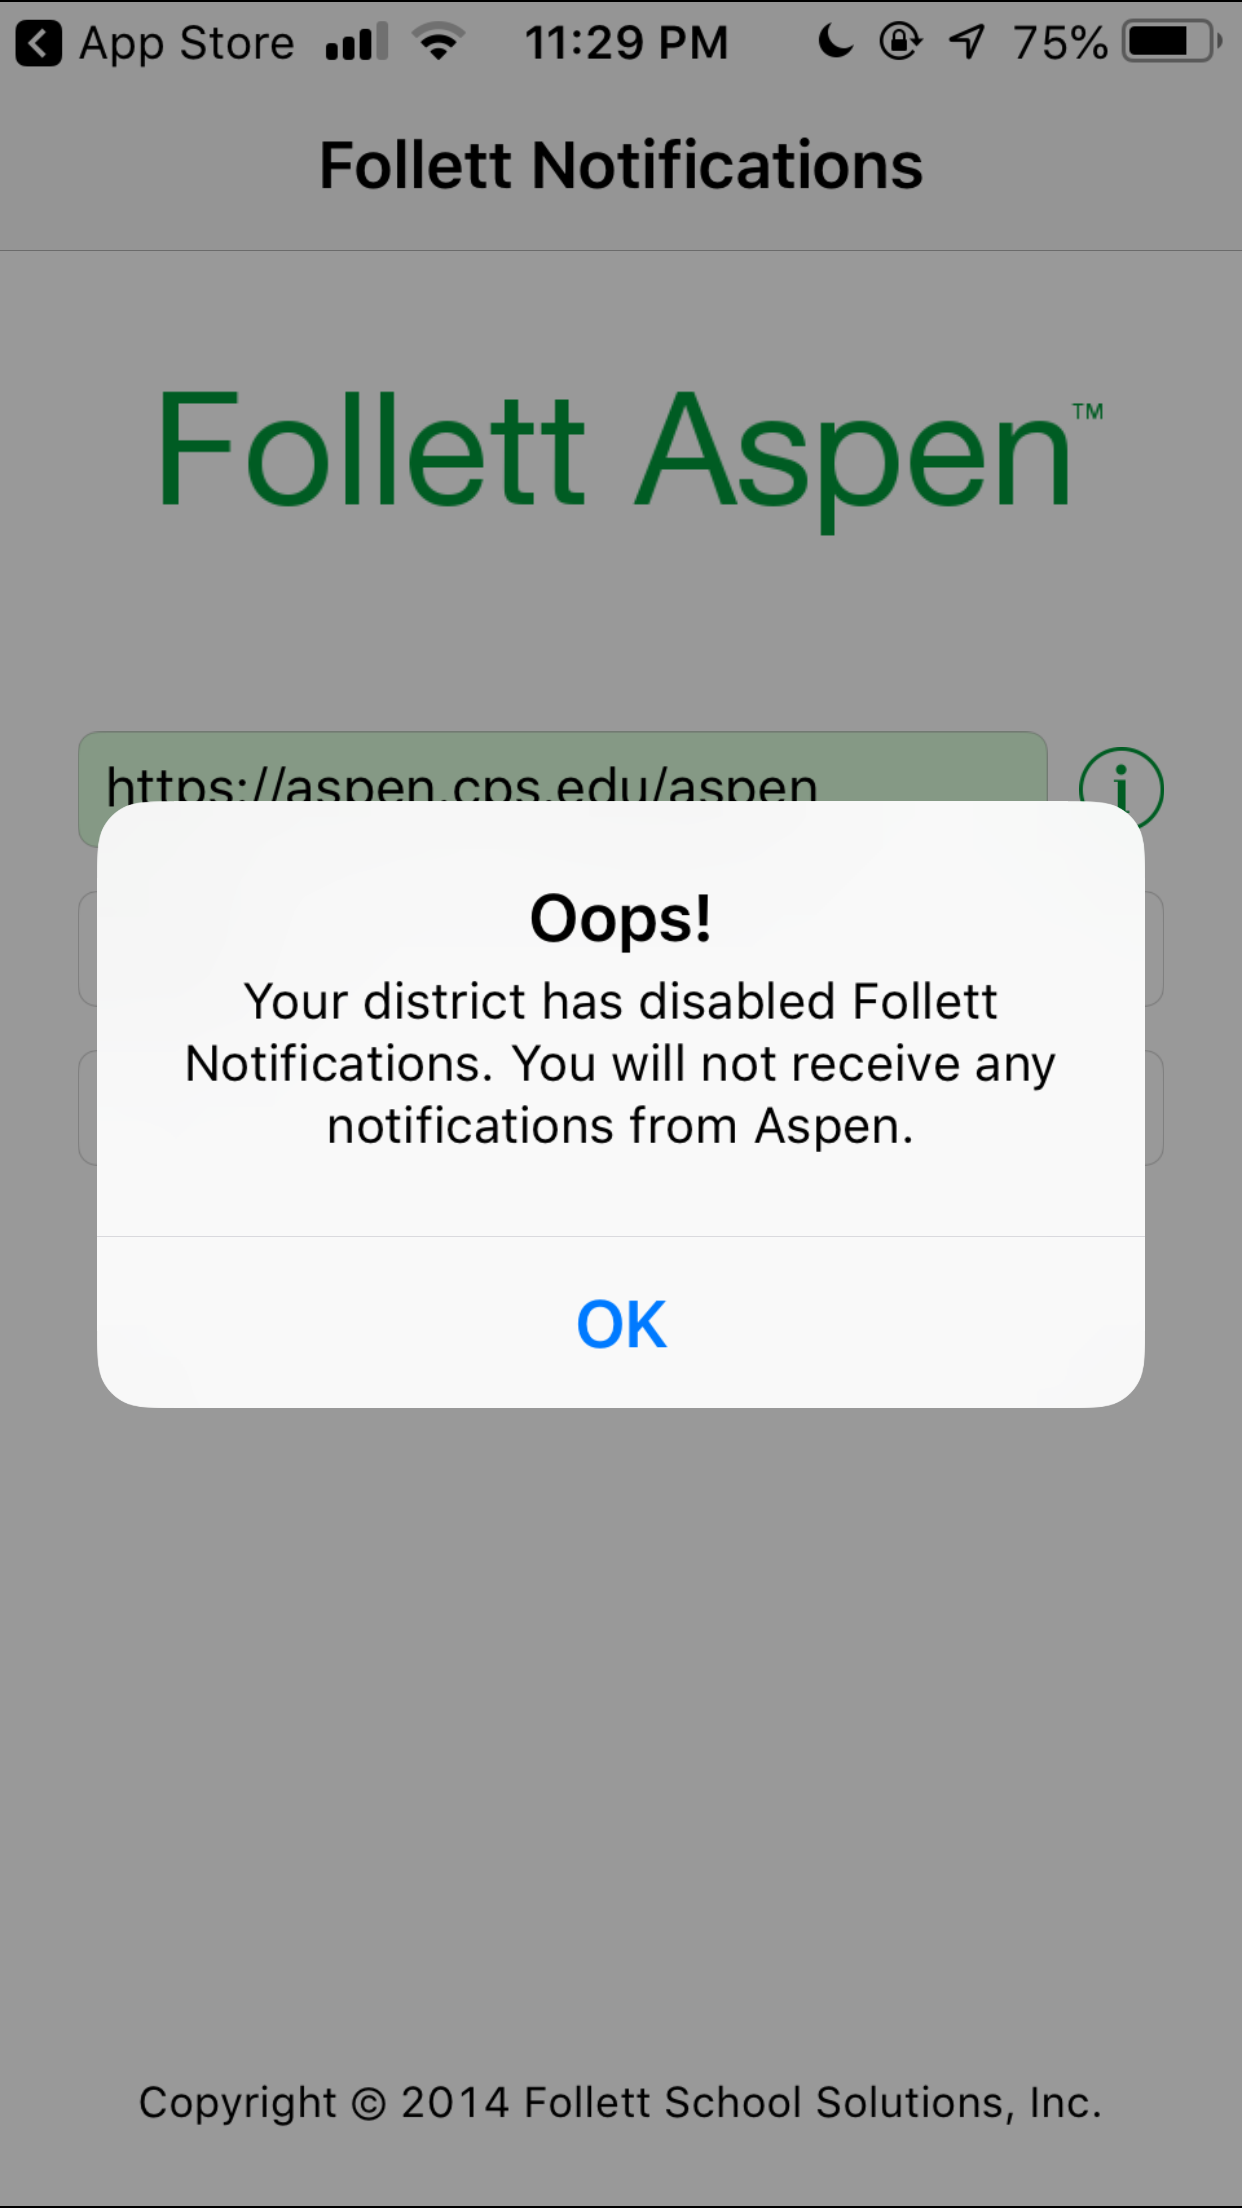 Notification showing that the mobile app is not available